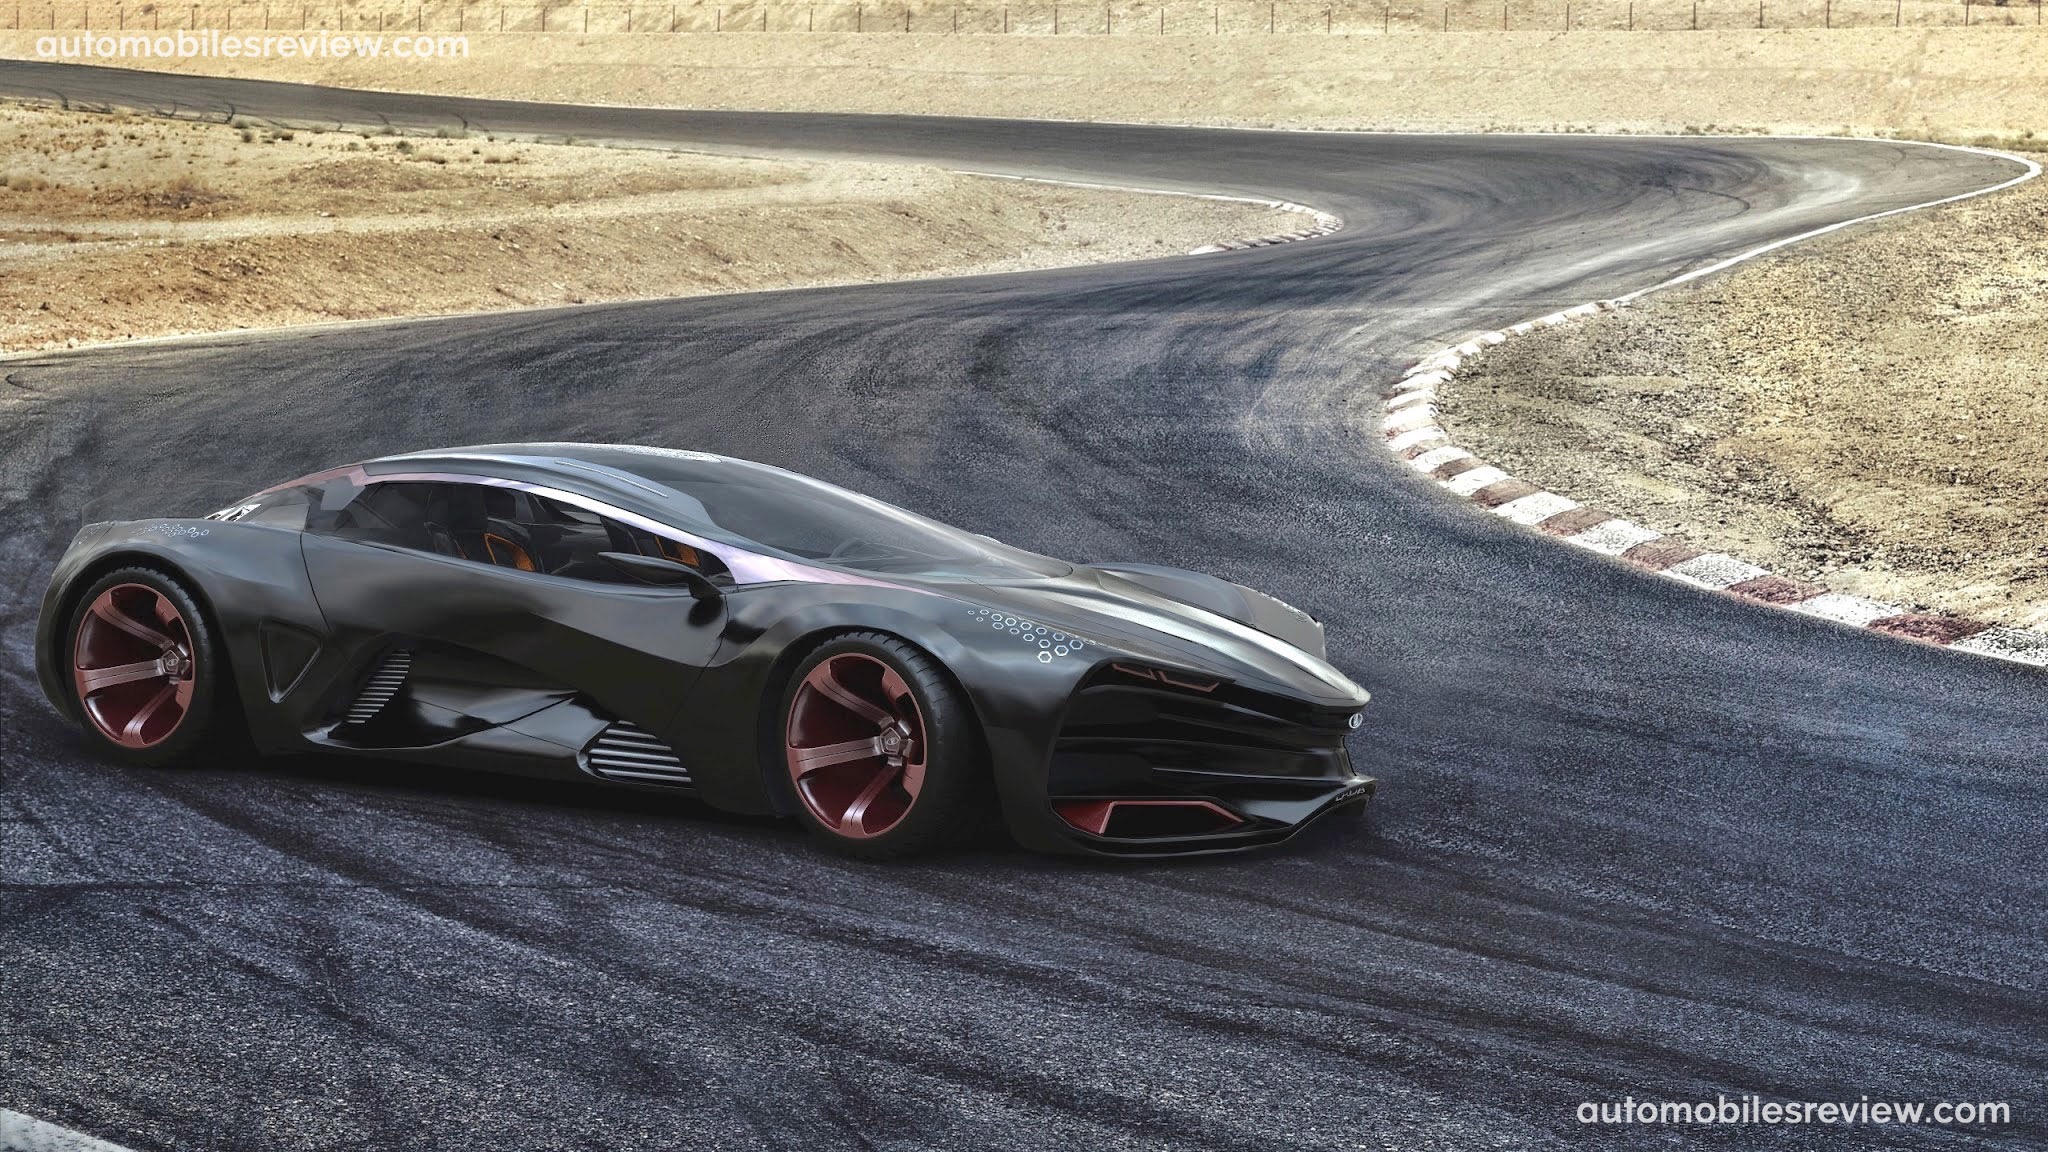 Lada Has In Mind A Supercar Concept [video]